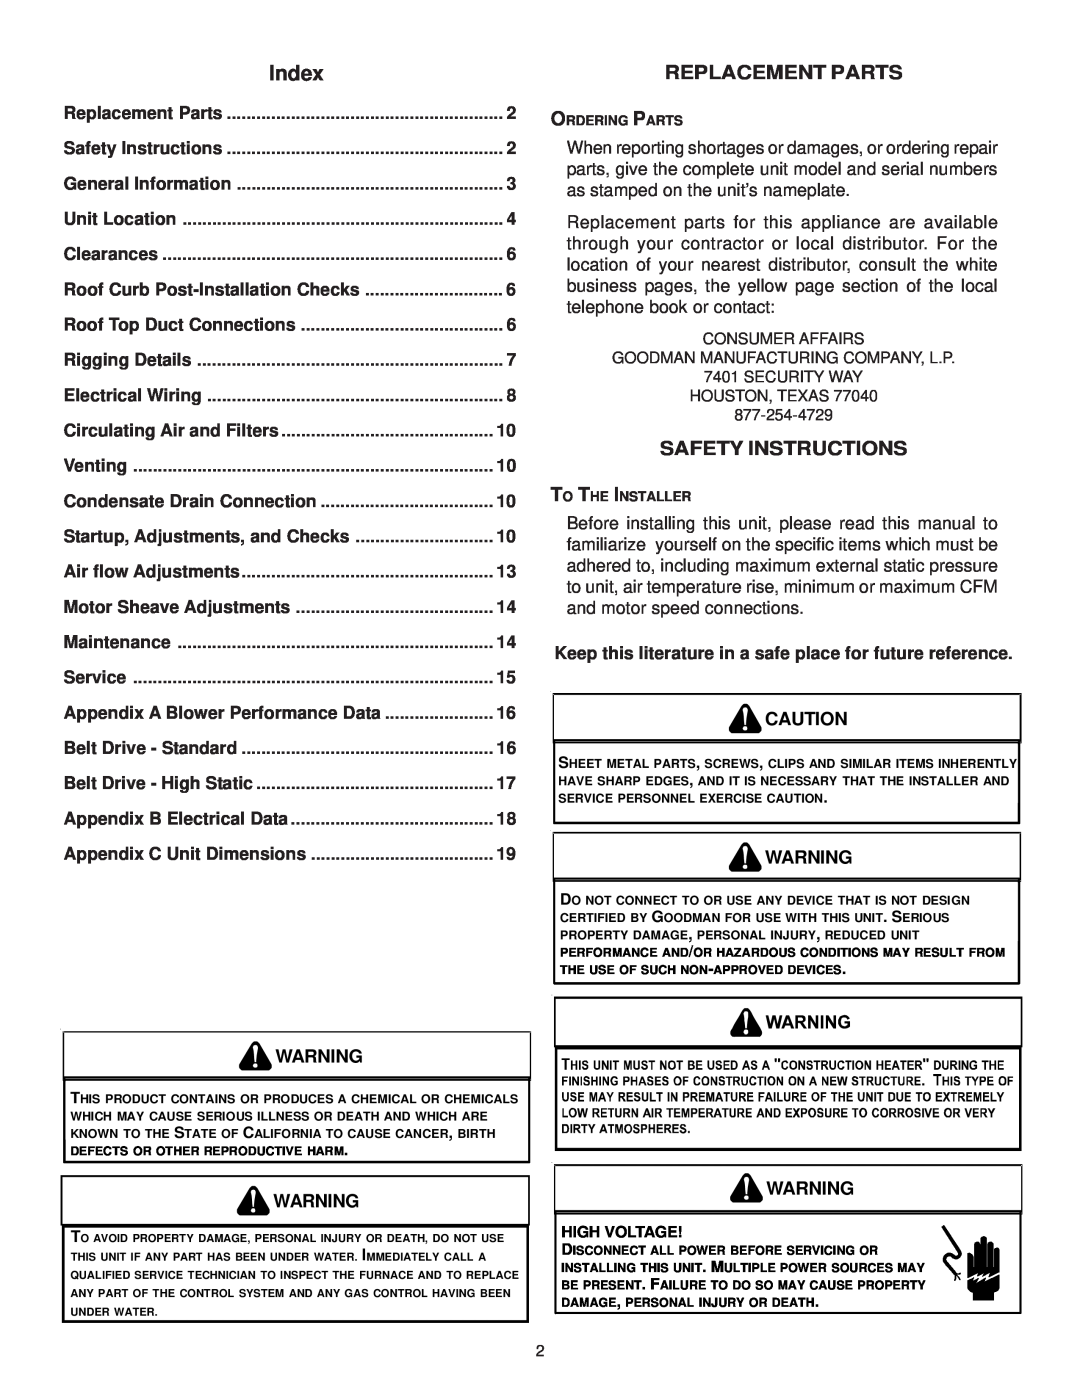 Goodman Mfg IO-367B installation instructions Index, Replacement Parts, Safety Instructions 